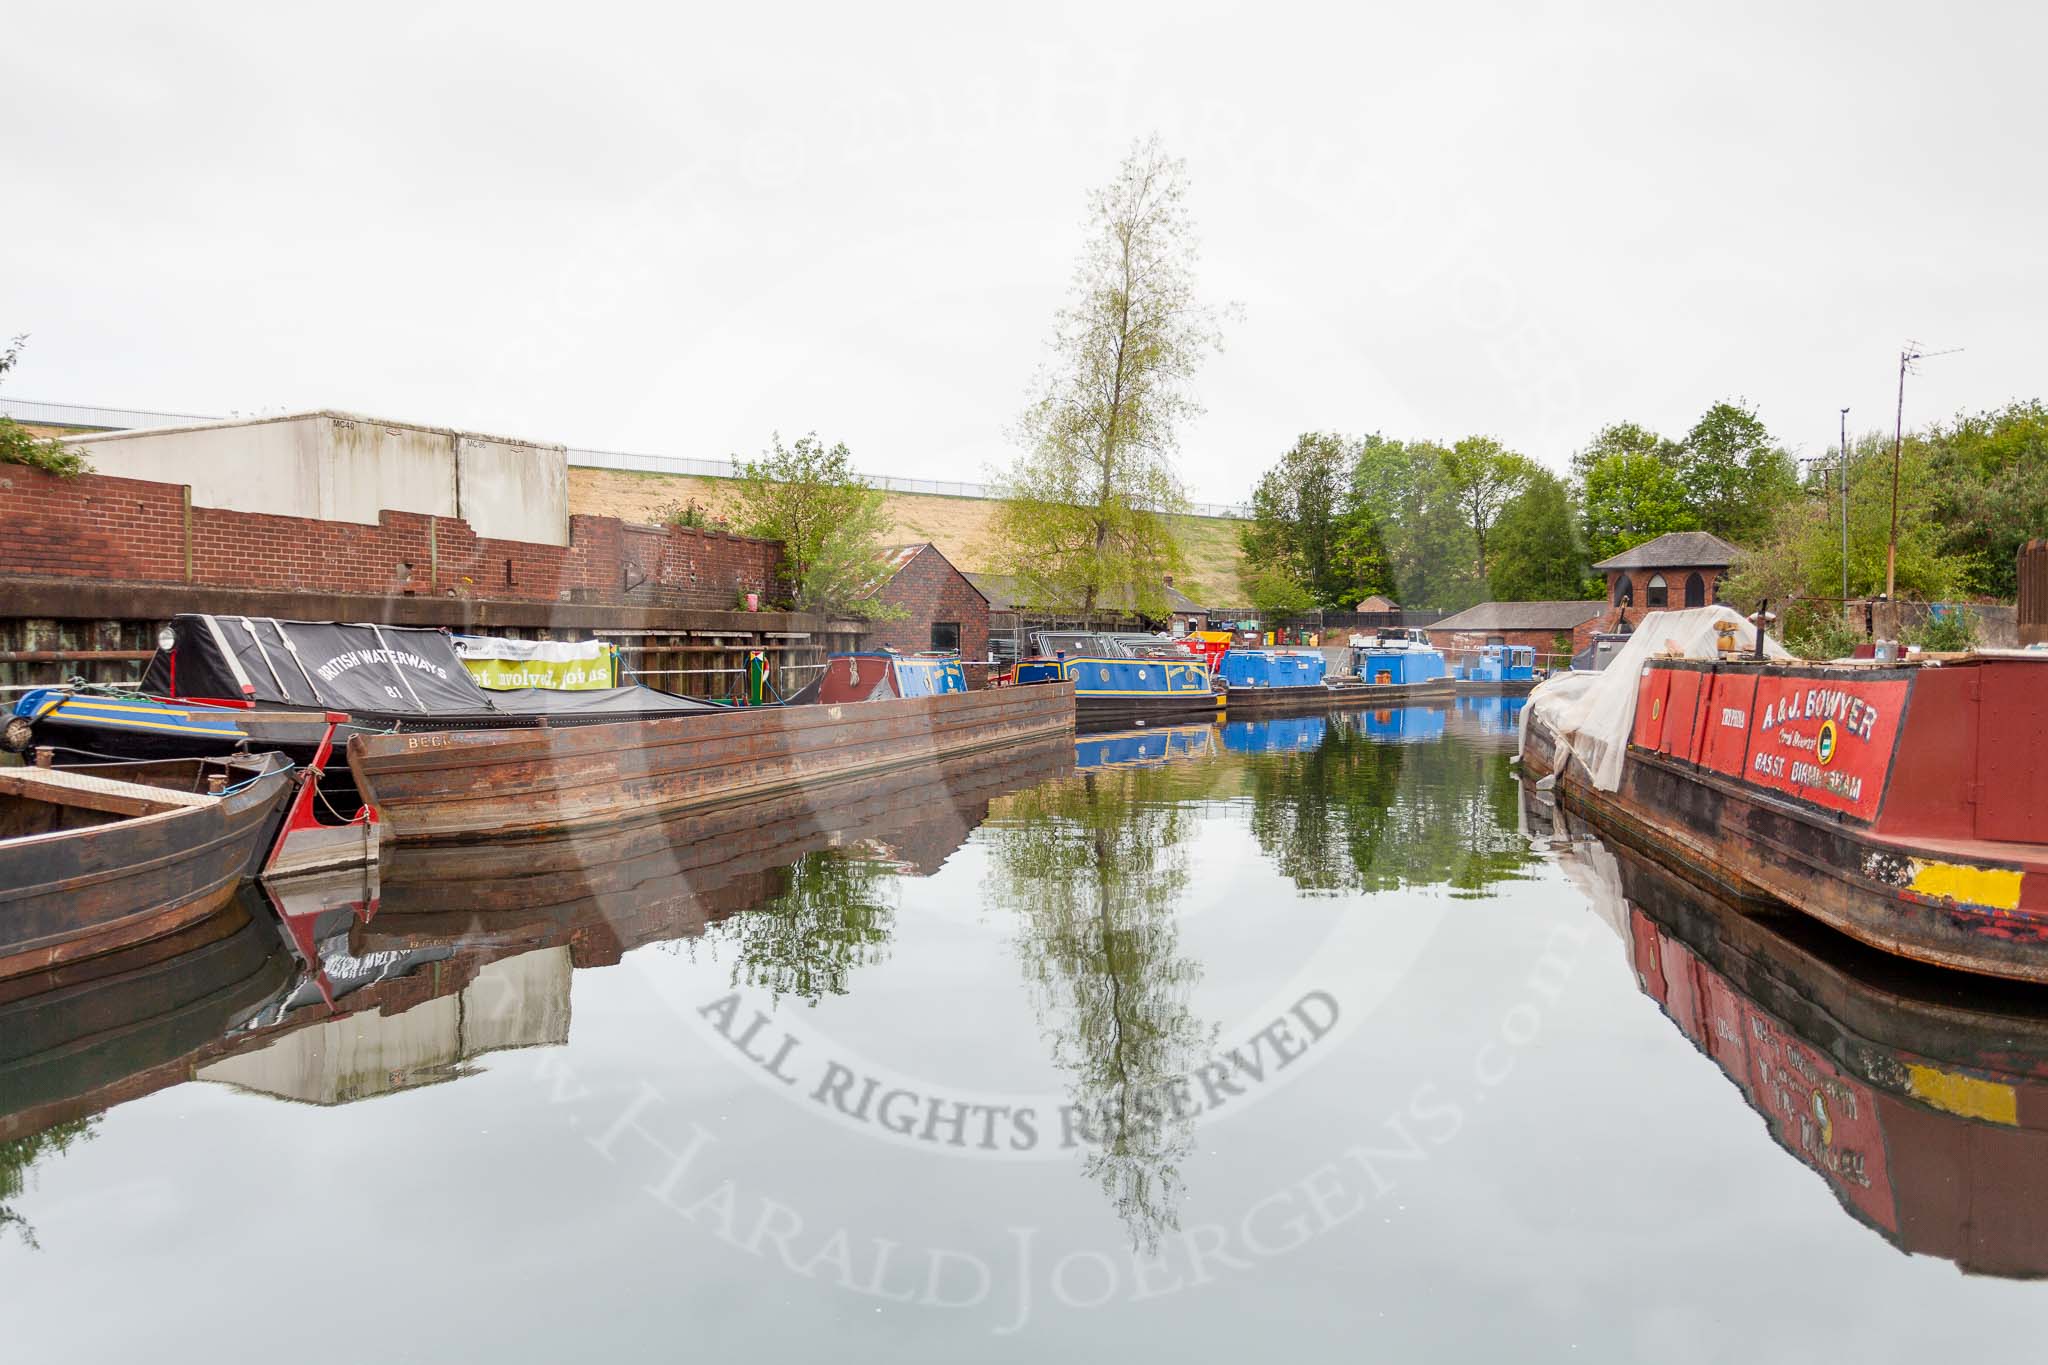 BCN 24h Marathon Challenge 2015: The Canal & River Trust maintenance depot at Icknield Port, with the dam of Rotton Park Reservoir behind.
Birmingham Canal Navigations,



on 23 May 2015 at 08:49, image #17